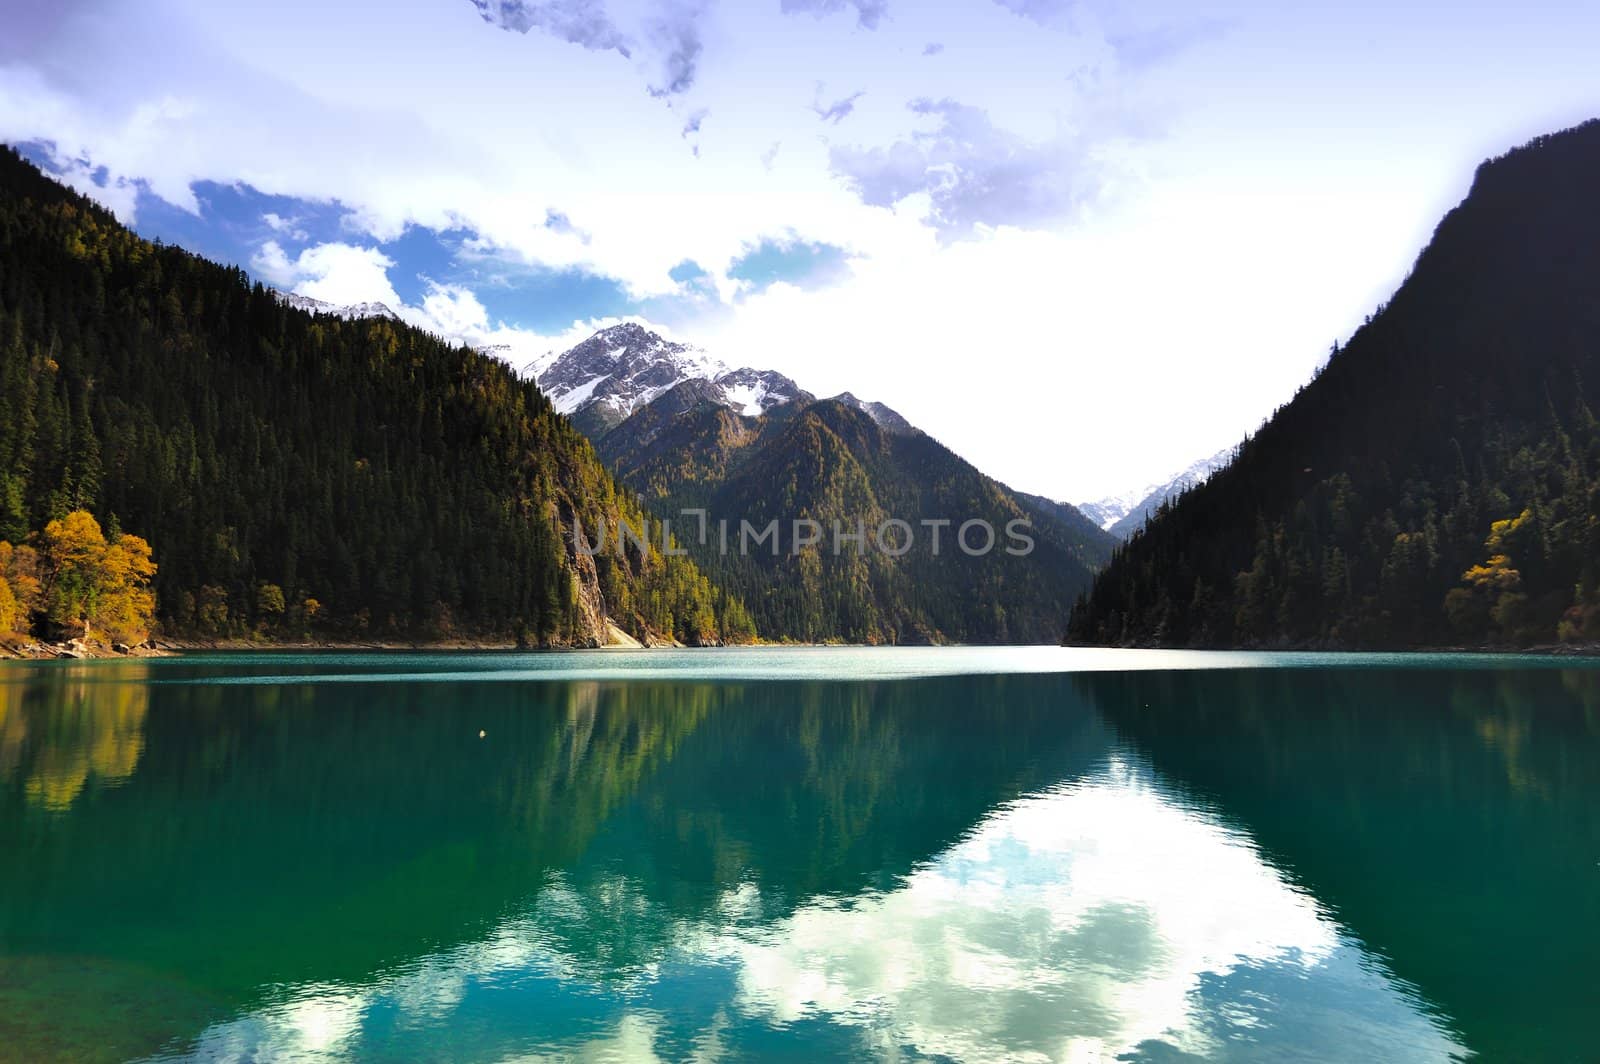 Landscape of forest and lake in China Jiuzhaigou by raywoo